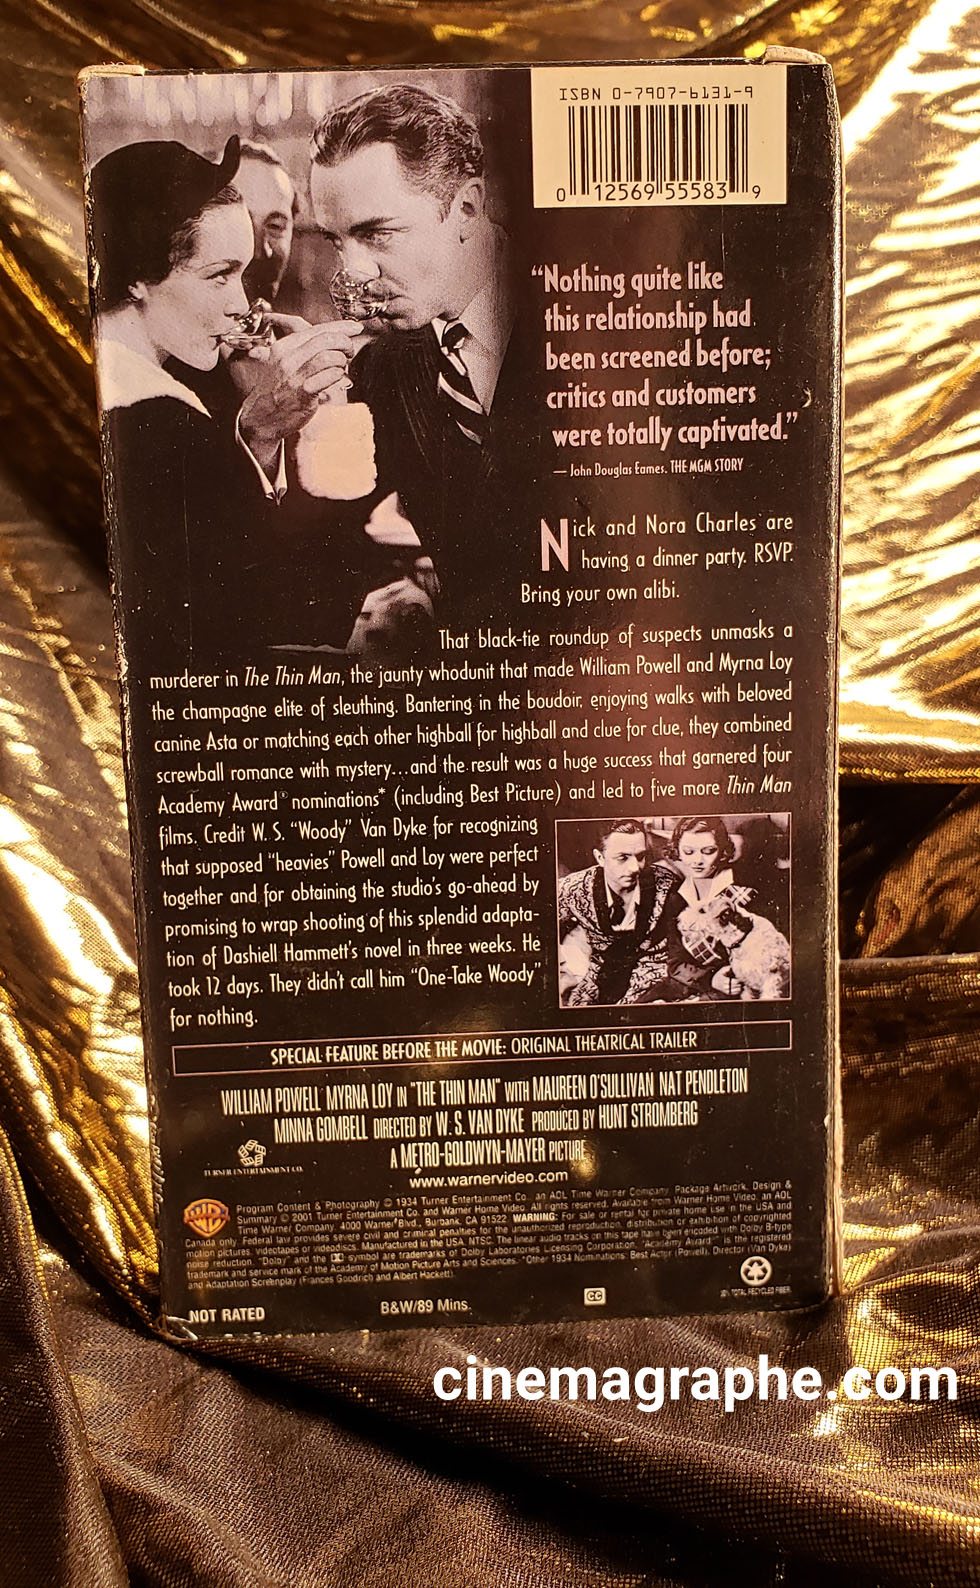 Back Text - The Thin Man movie Video VHS tape box